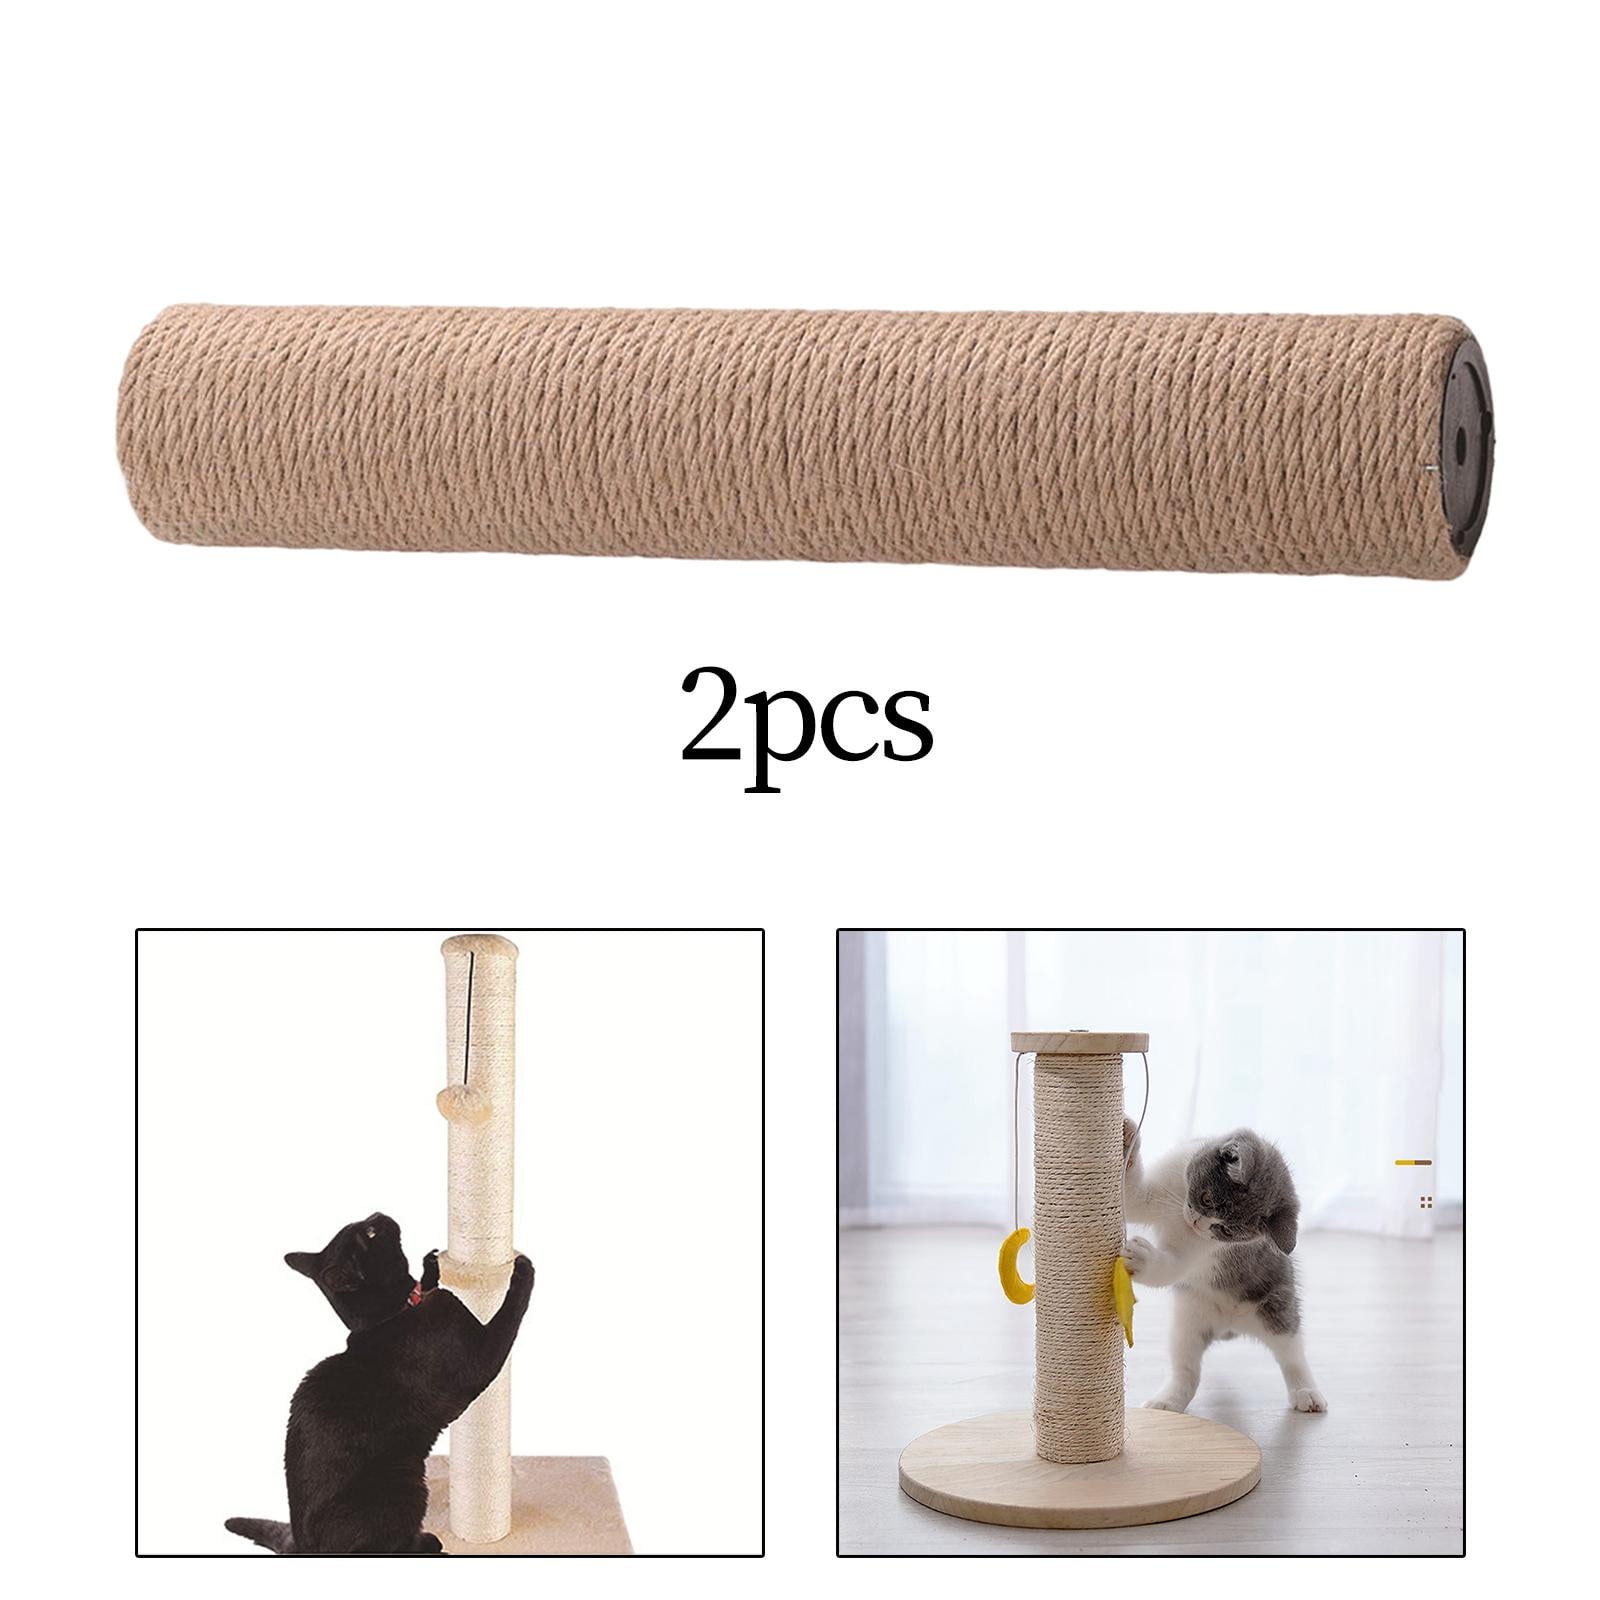 Cage Mount Scratcher, 30 Spare Cat Tree Scratching Scratcher Sisal Rope Replacement Post Refill-Cage Mounted Scratch Posts for Kitten 